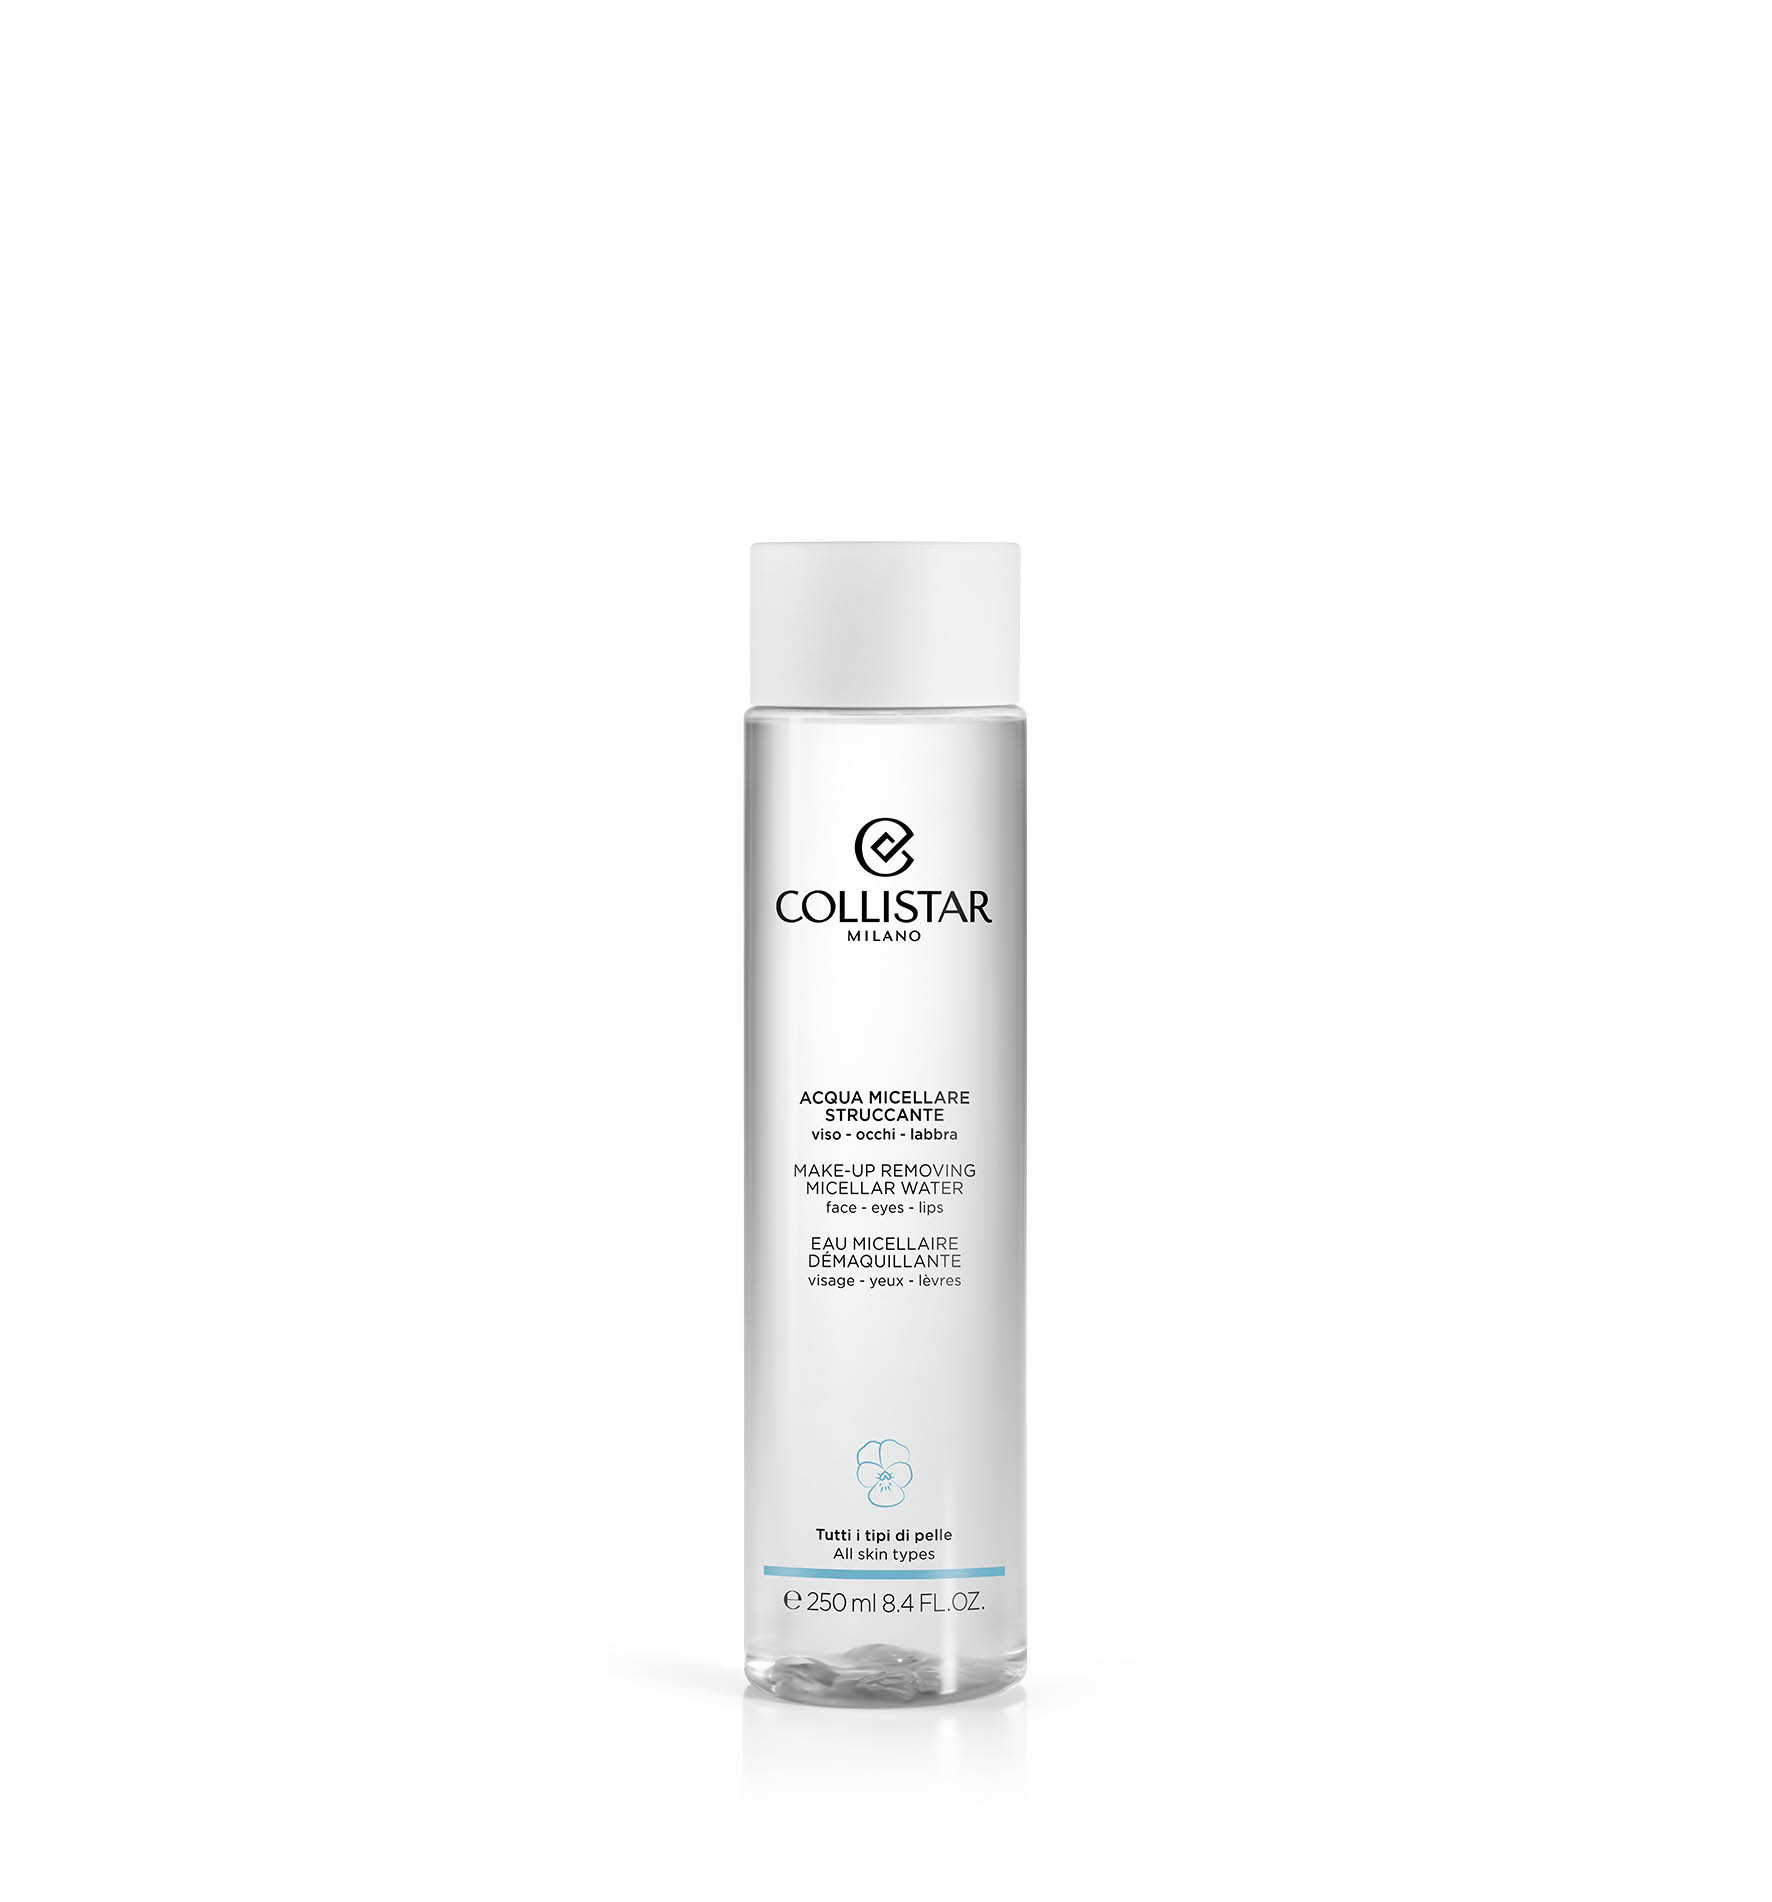 MAKE-UP REMOVING MICELLAR WATER FACE-EYES-LIPS - NEW | Collistar - Shop Online Ufficiale